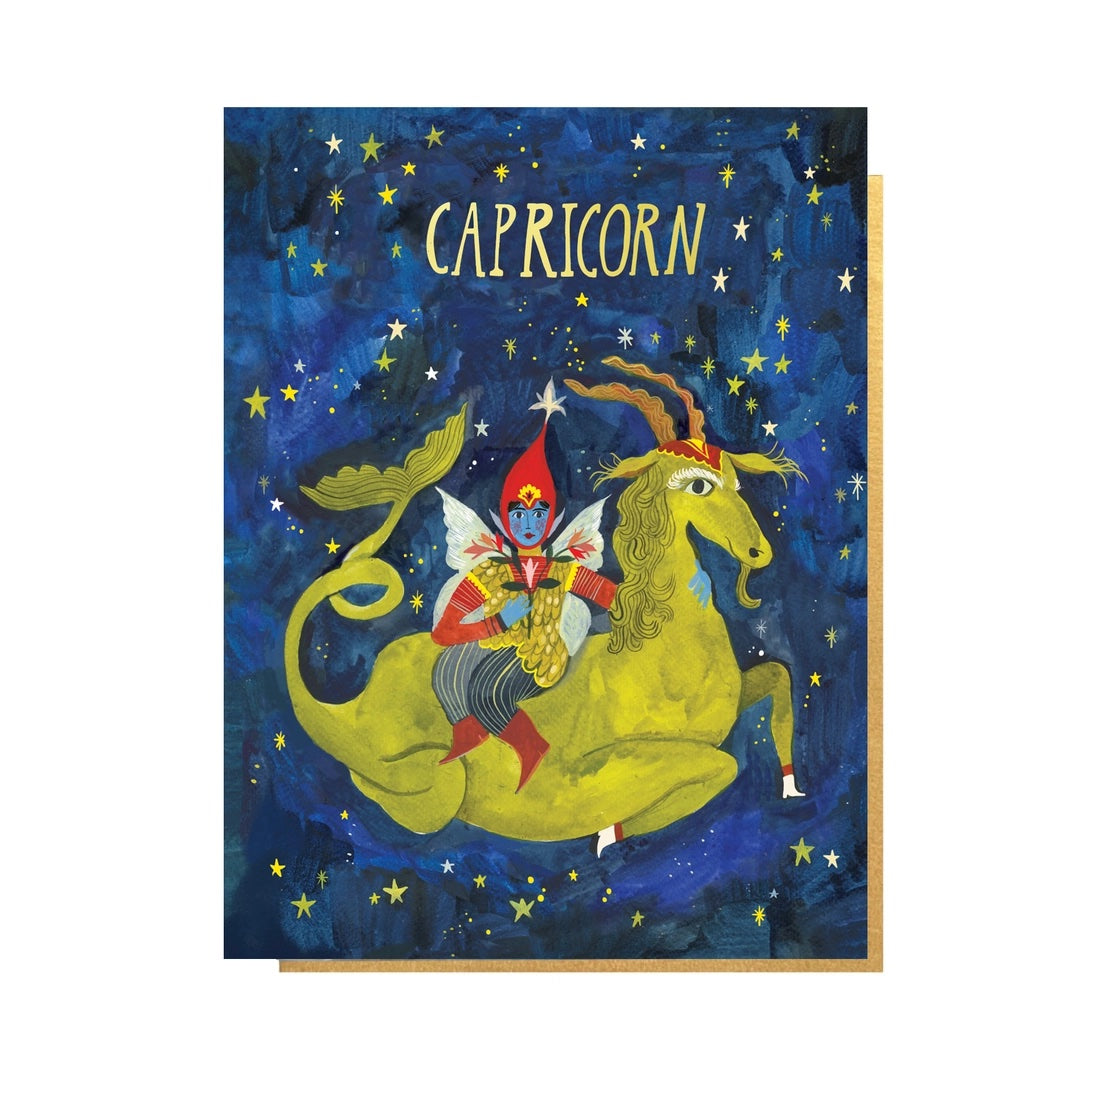 Folding card with illustration of fairy riding a sea-goat in a starry sky Capricorn written above